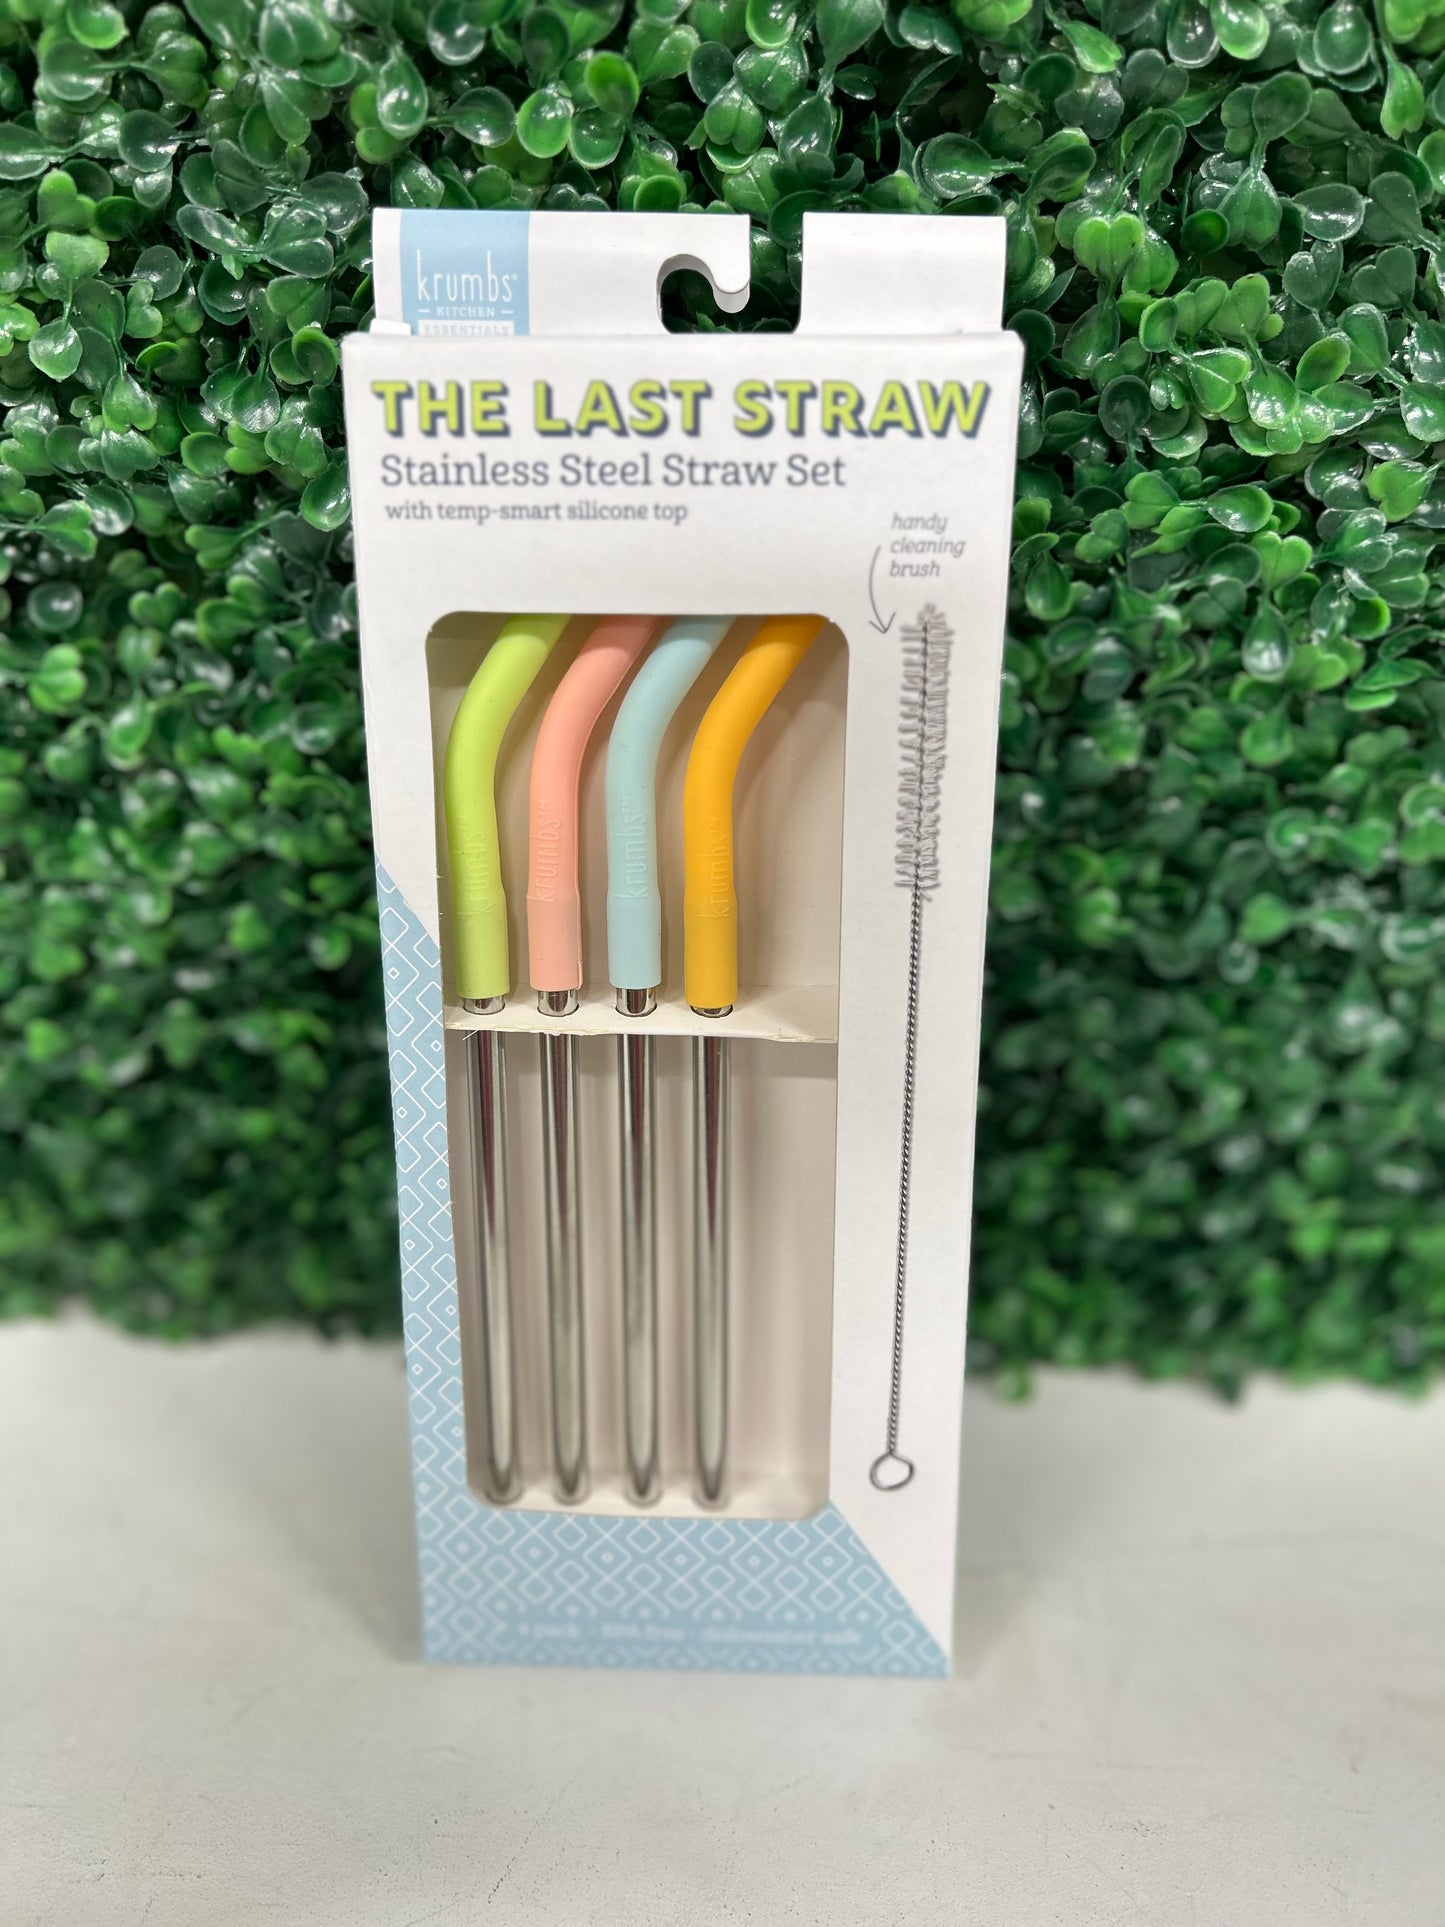 The Last Straw- Stainless Steel Straw Set